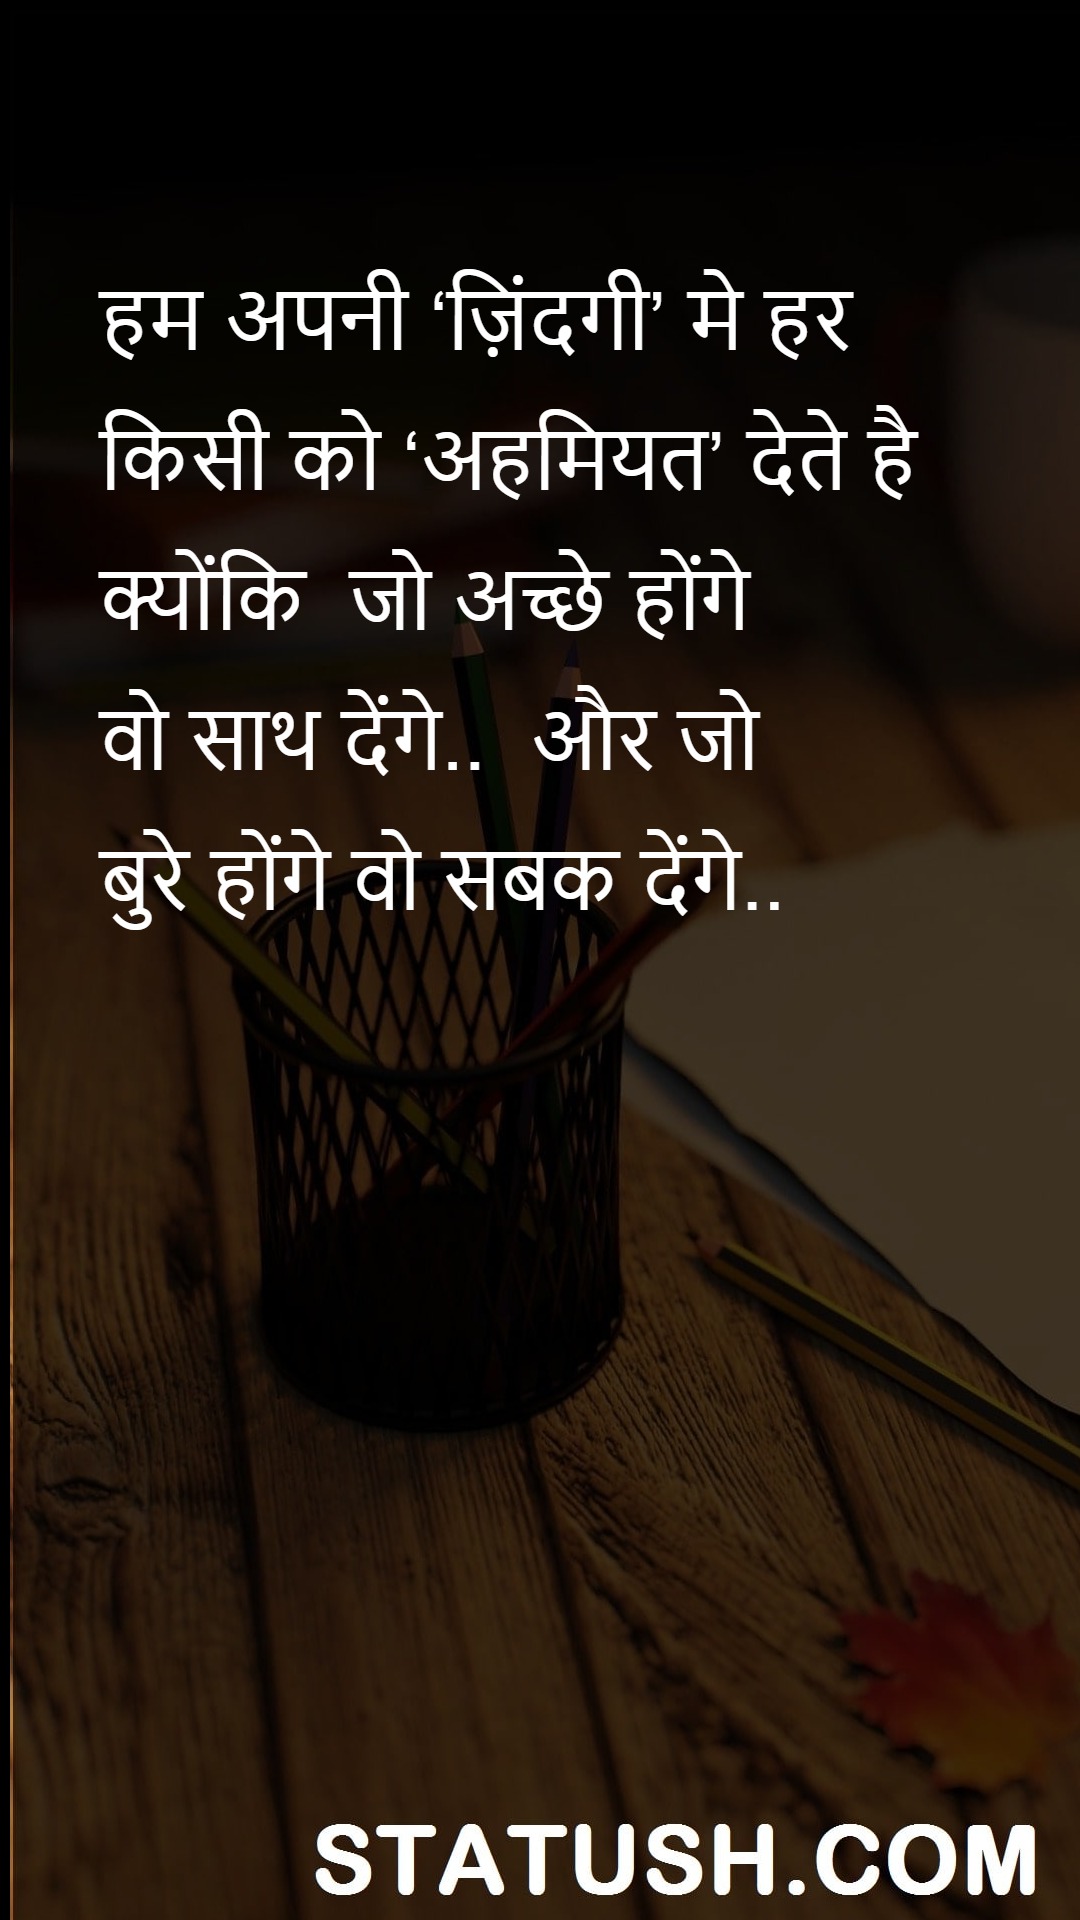 We give importance to everyone in our life - Hindi Quotes at statush.com